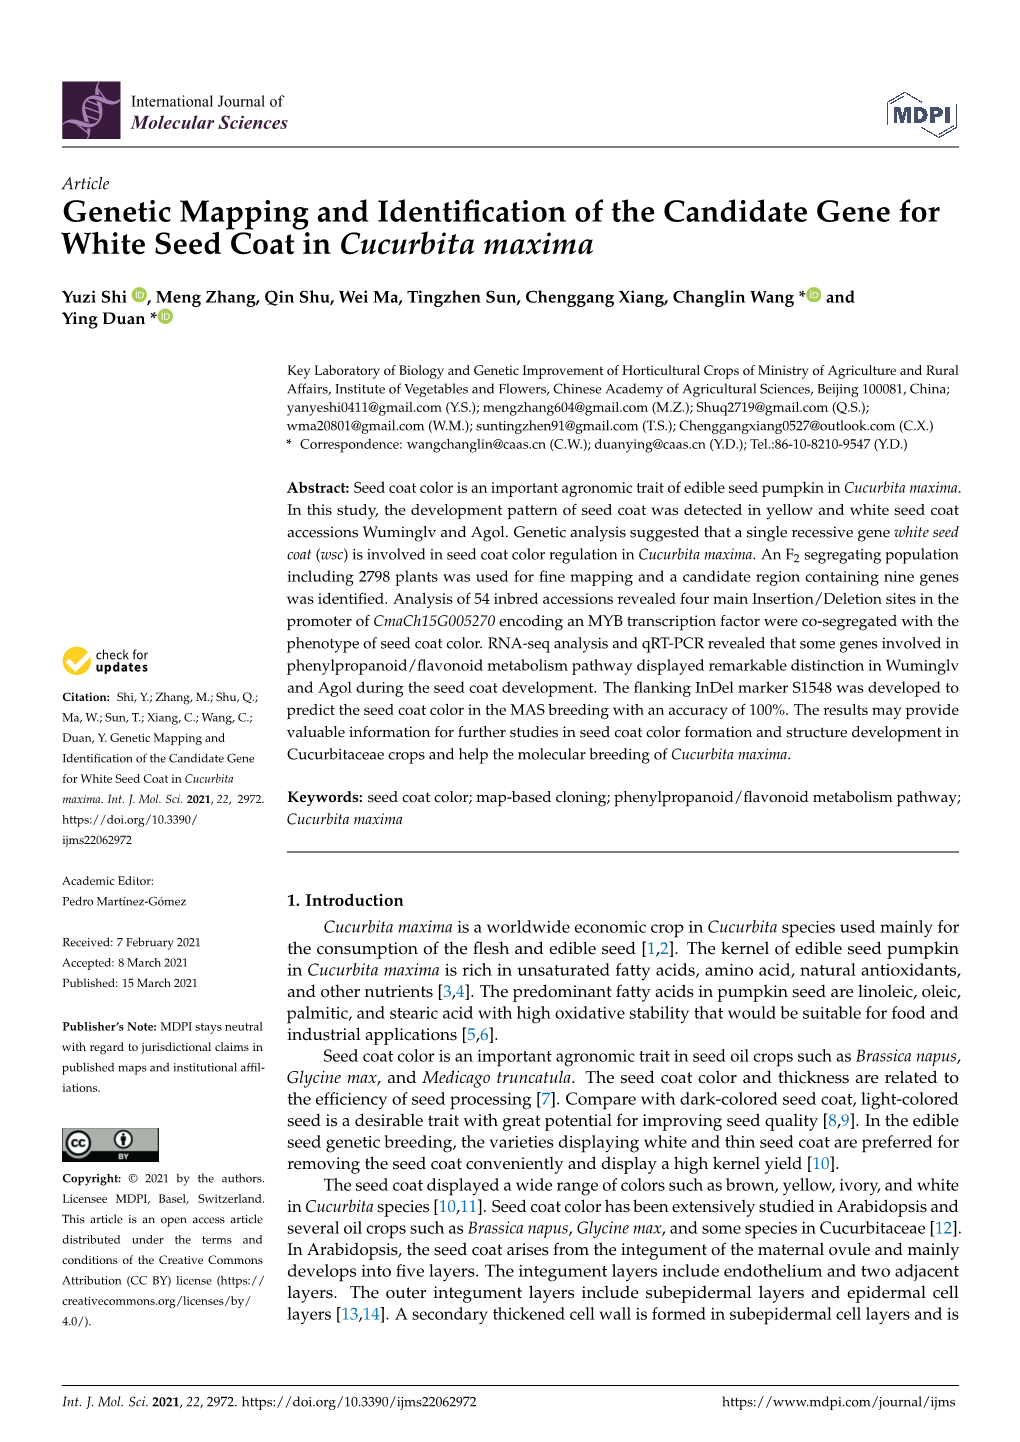 Genetic Mapping and Identification of the Candidate Gene for White Seed